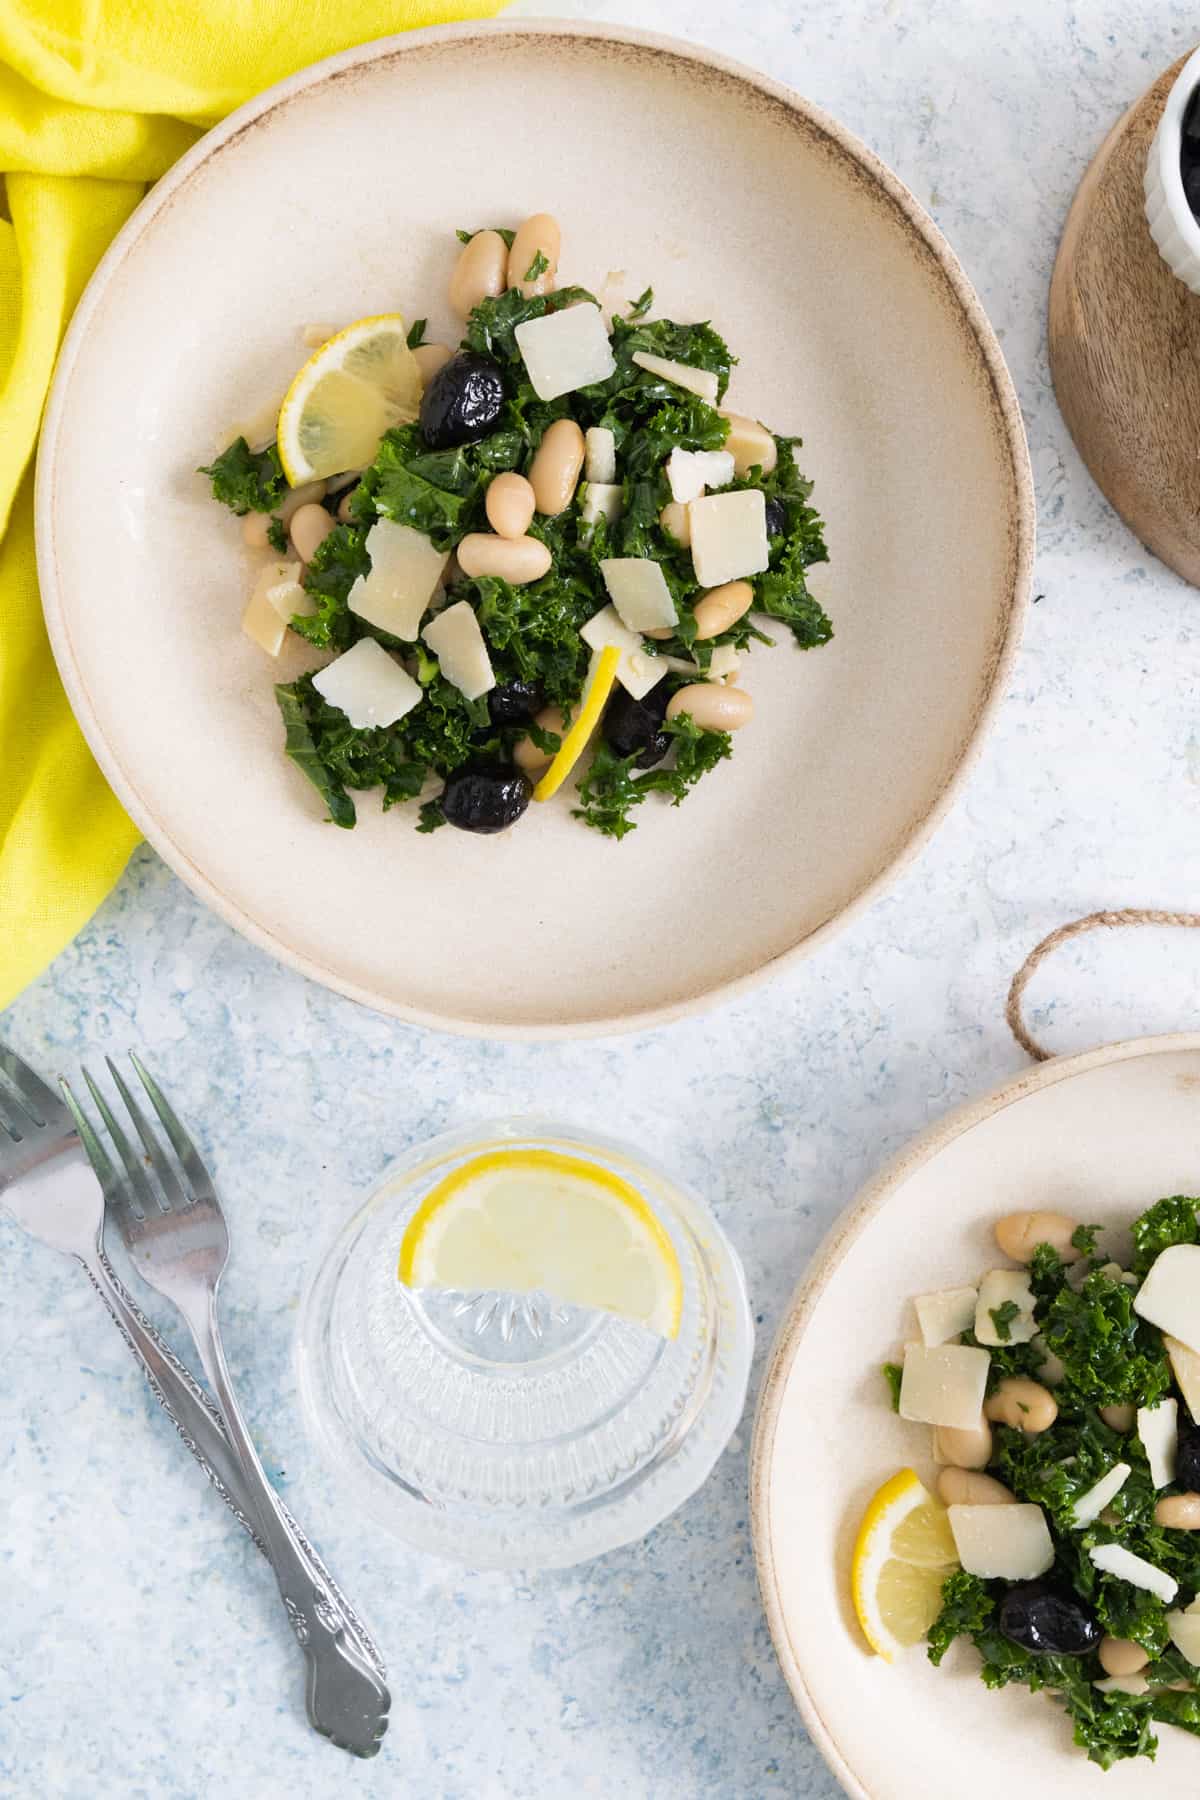 one plate with kale salad, a yellow tea towel on the top left corner and another plate on the bottom right corner.